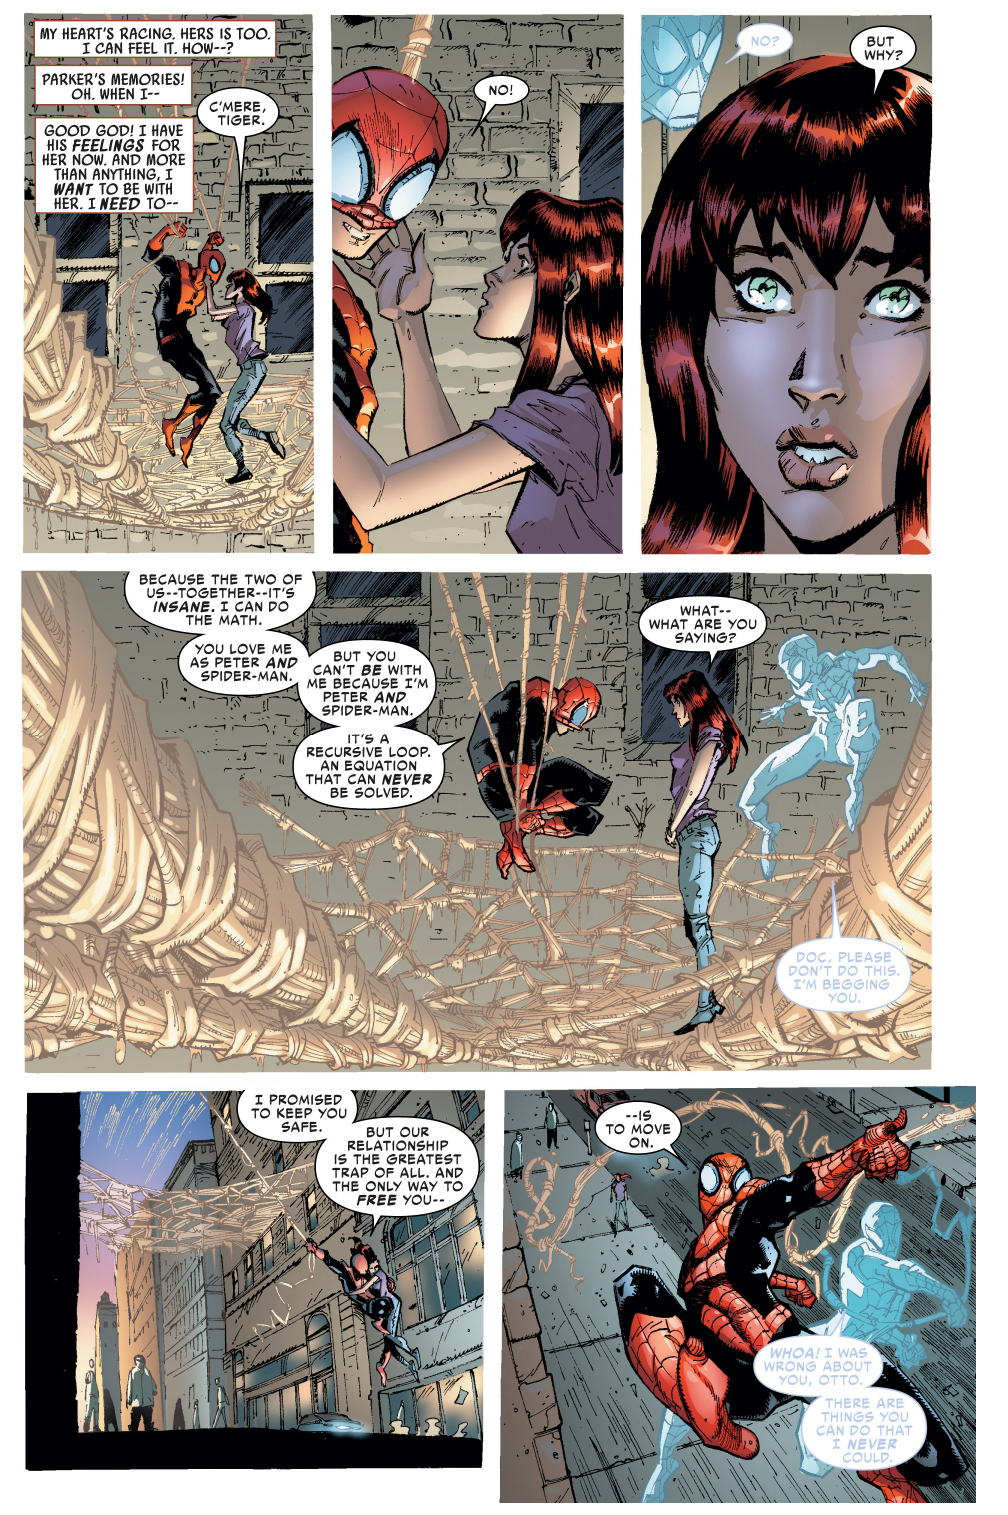 superior spider-man breaks up with mary jane